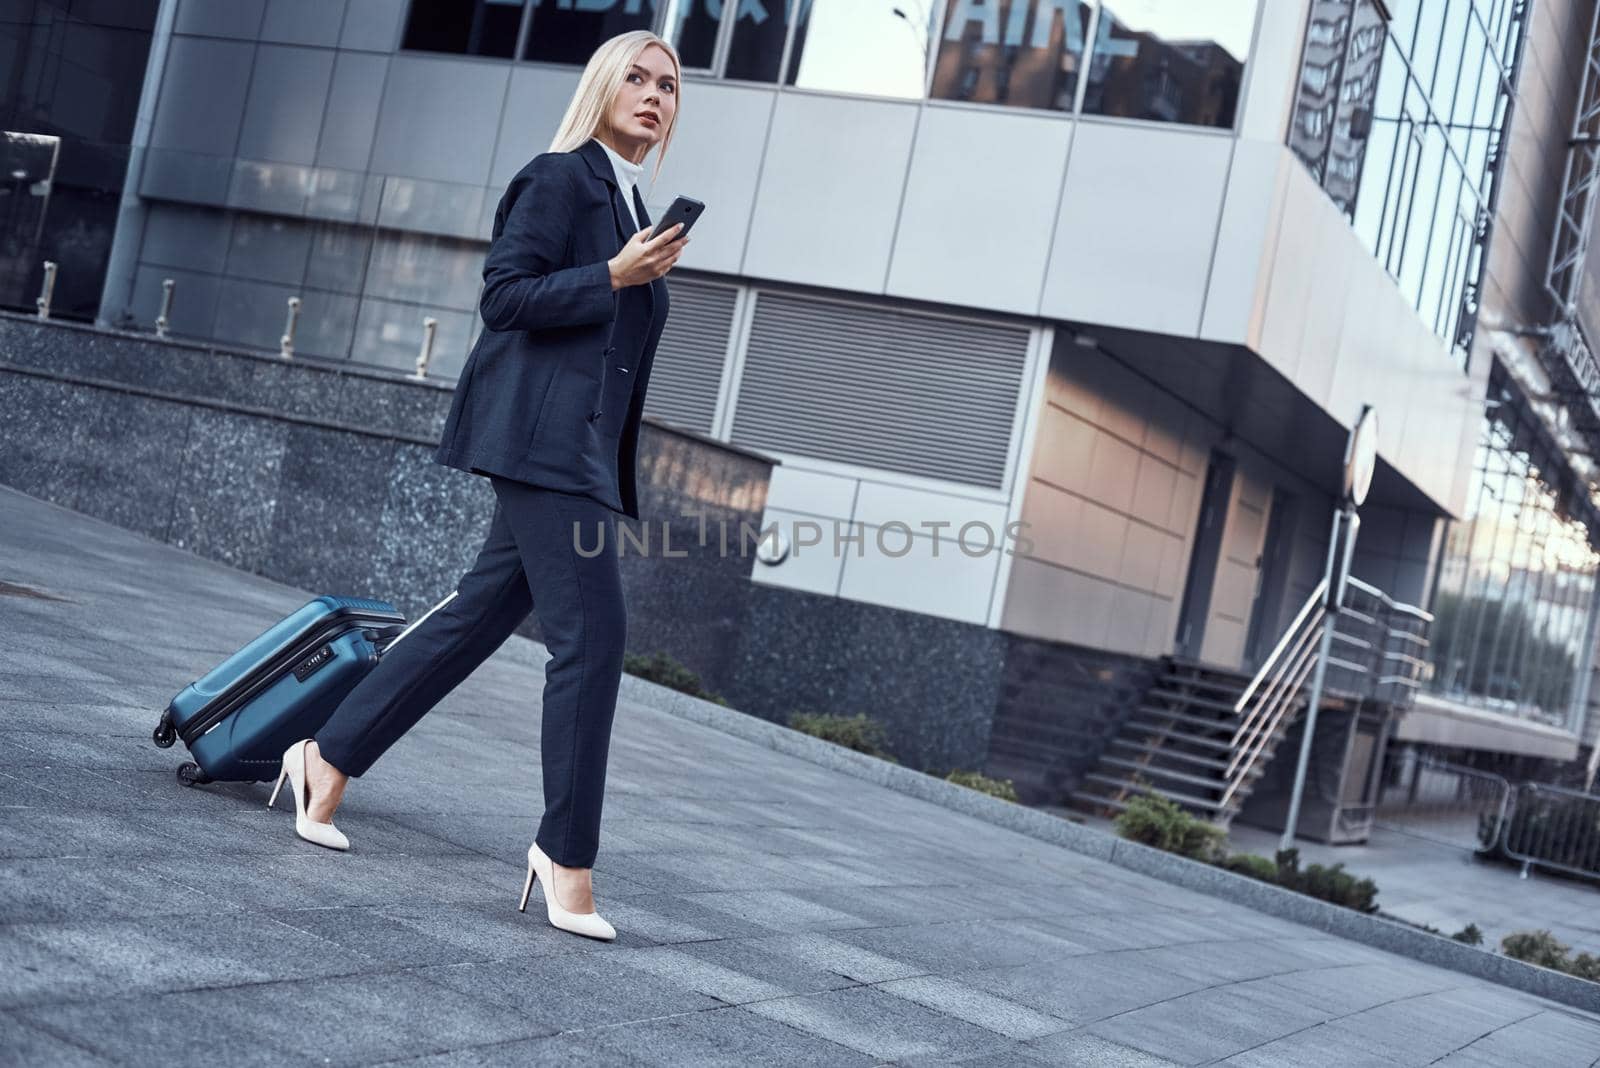 Travel, business trip. People and technology concept - happy young woman with travel bag on city street